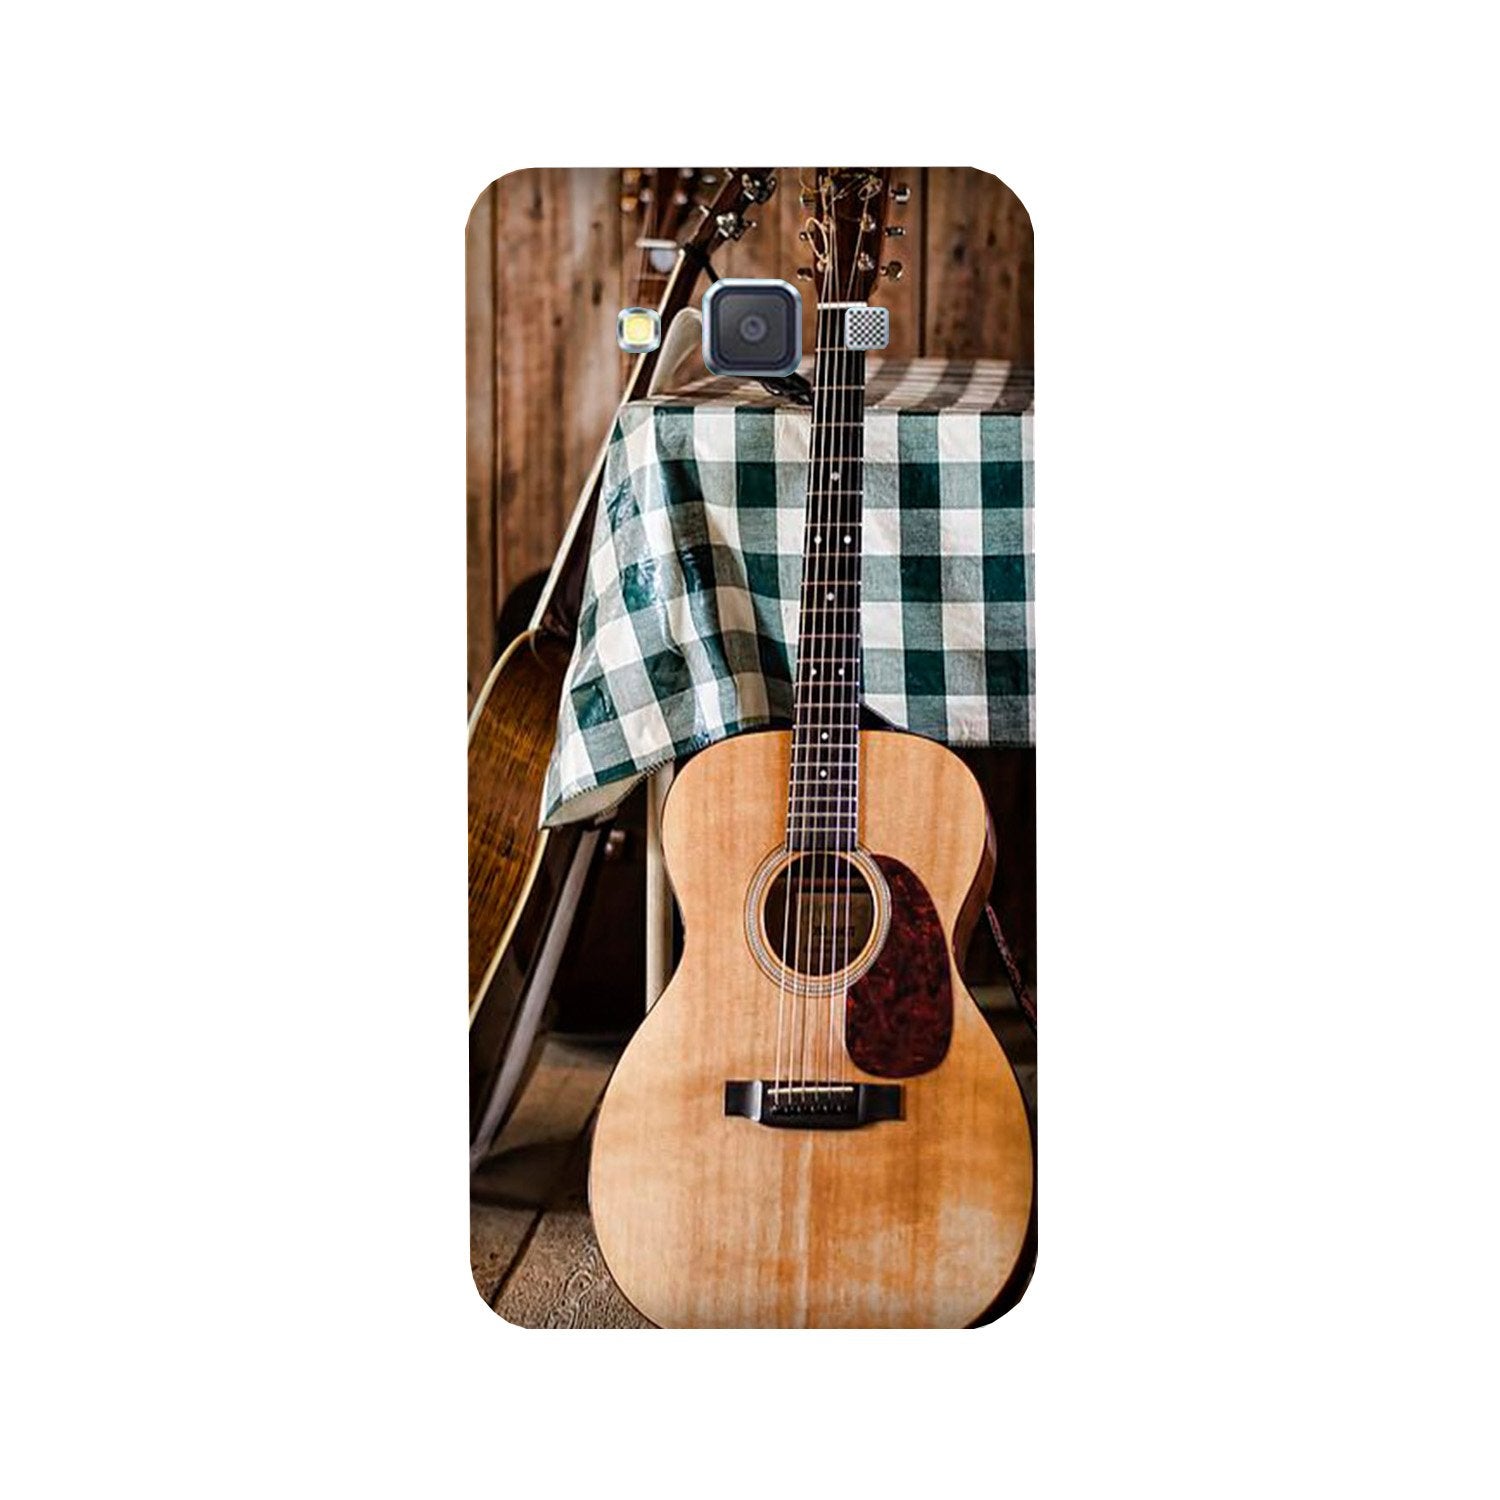 Guitar2 Case for Galaxy ON5/ON5 Pro